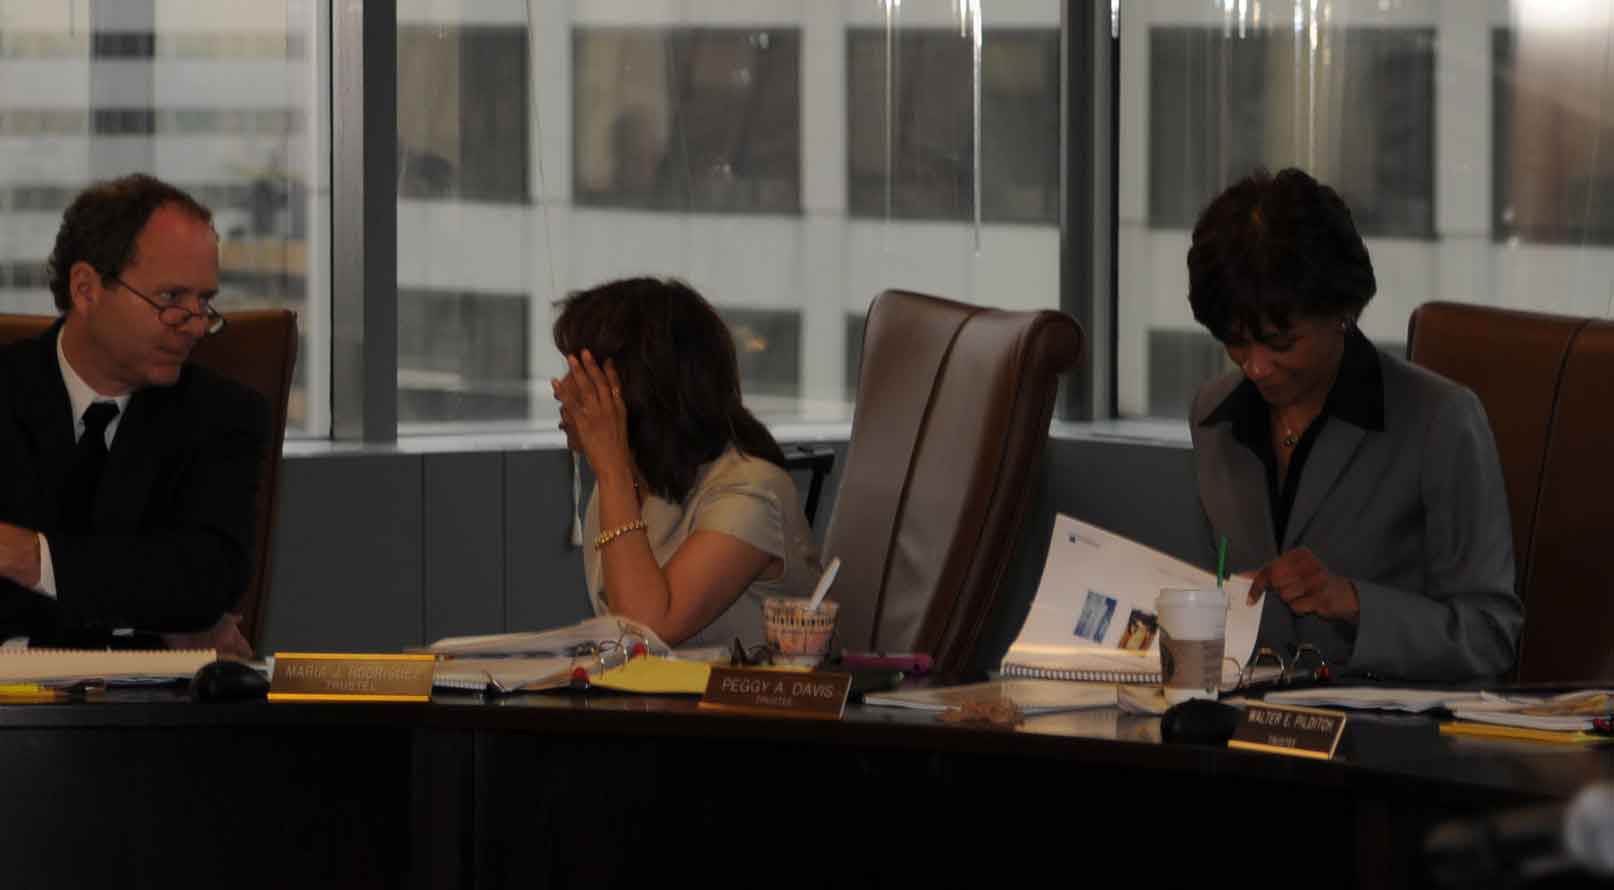 Above, CTPF attorney Joseph Burns in discussion with Teacher Trustee Maria Rodriguez, who works as a Field Rep for the Chicago Teachers Union. To the left of Rodriguez is Peggy Davis, the second Trustee who represents the Chicago Board of Education. During the meeting, Rodriguez repeatedly covered her face when Substance was photographing the meeting. Substance photo by George N. Schmidt.